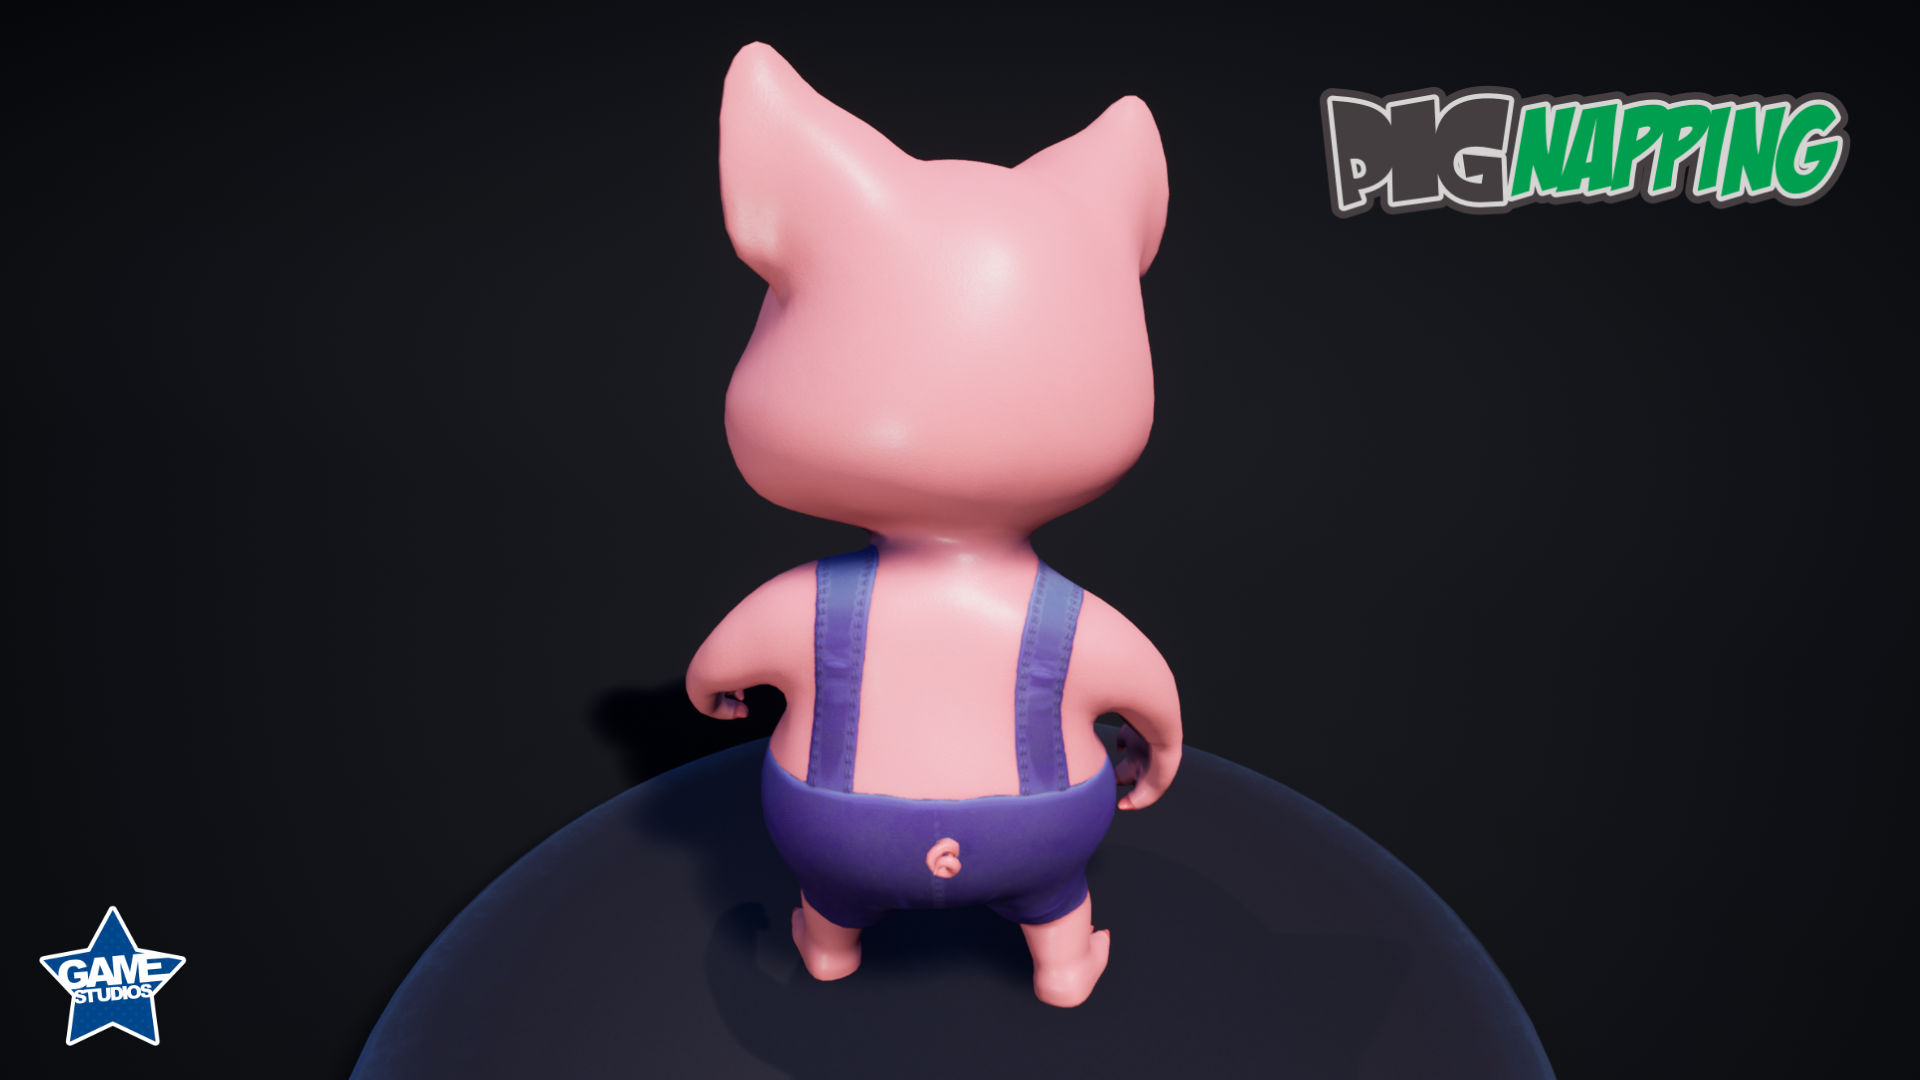 Back - Pig 3d Character - PigNapping